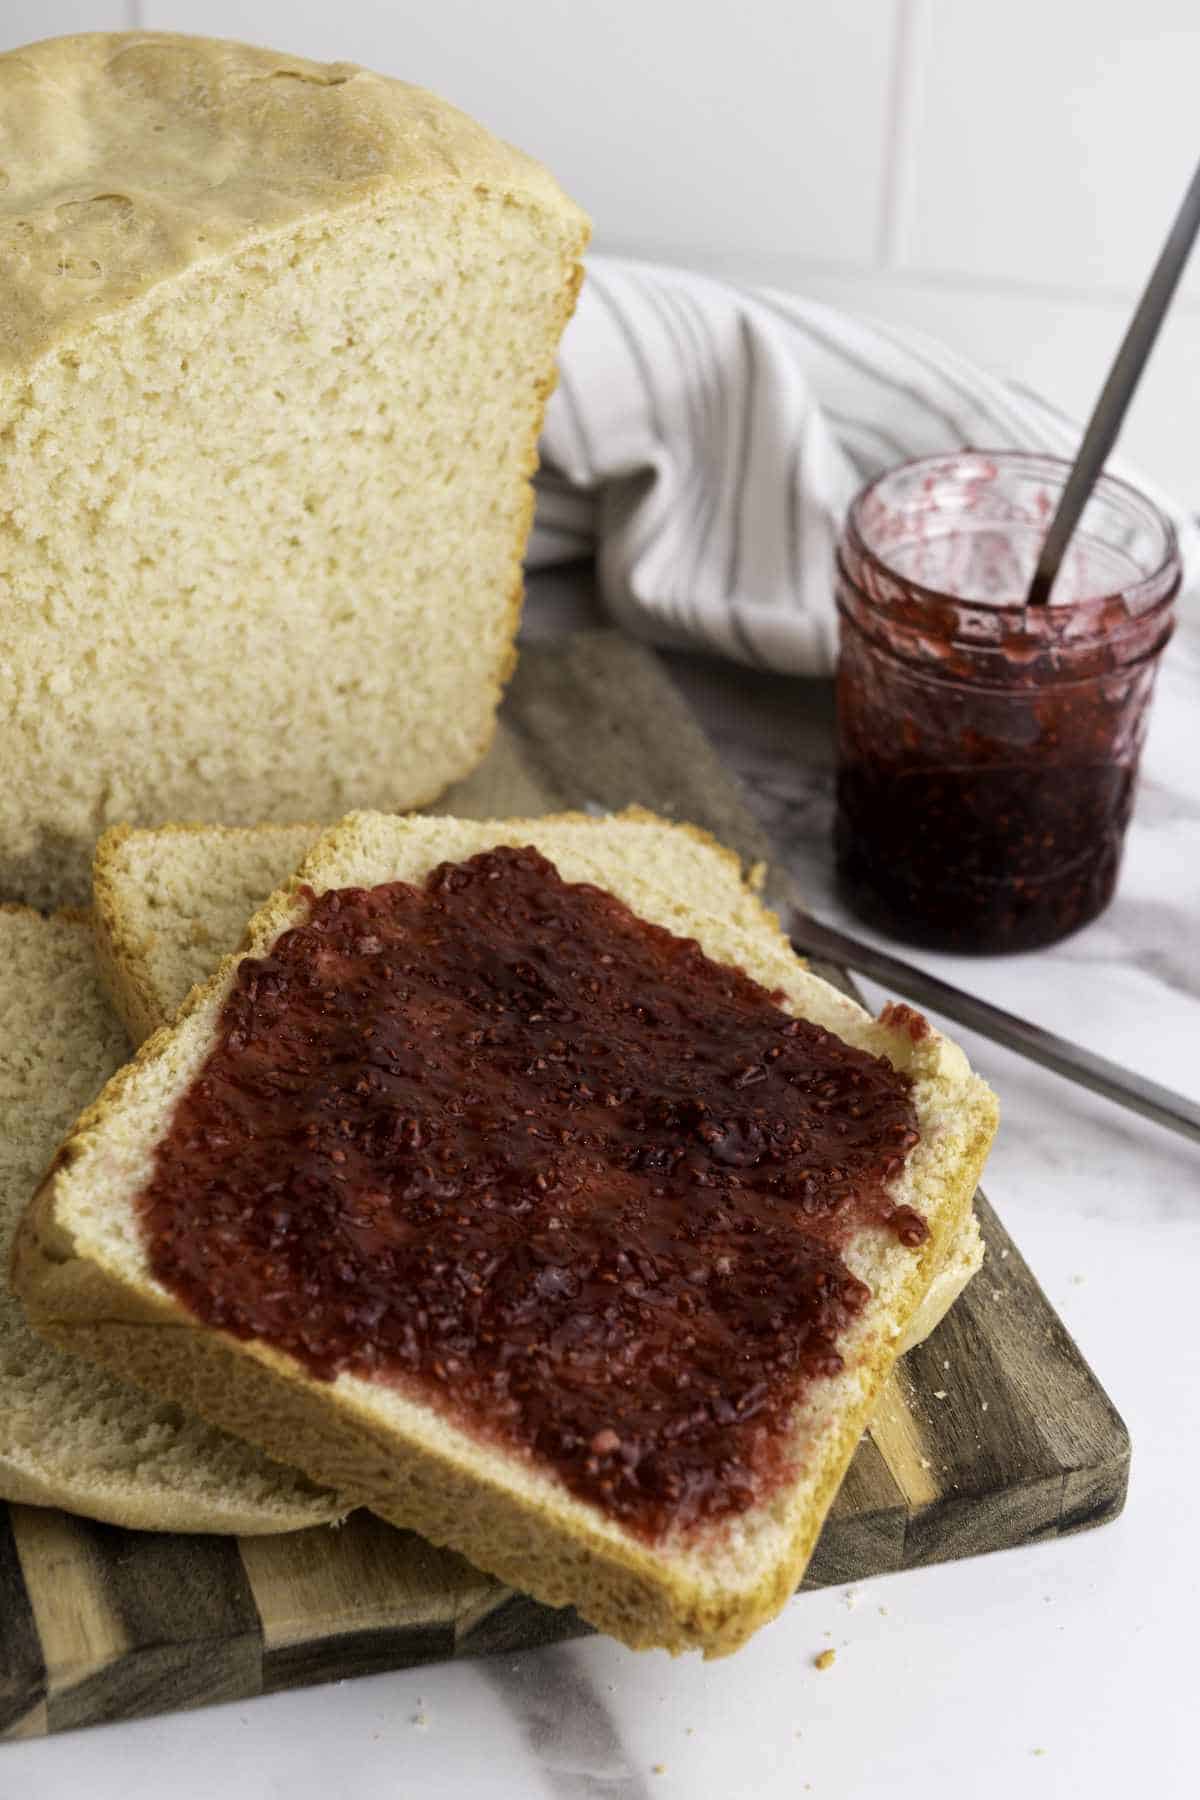 Slices of bread with jam spread on it.